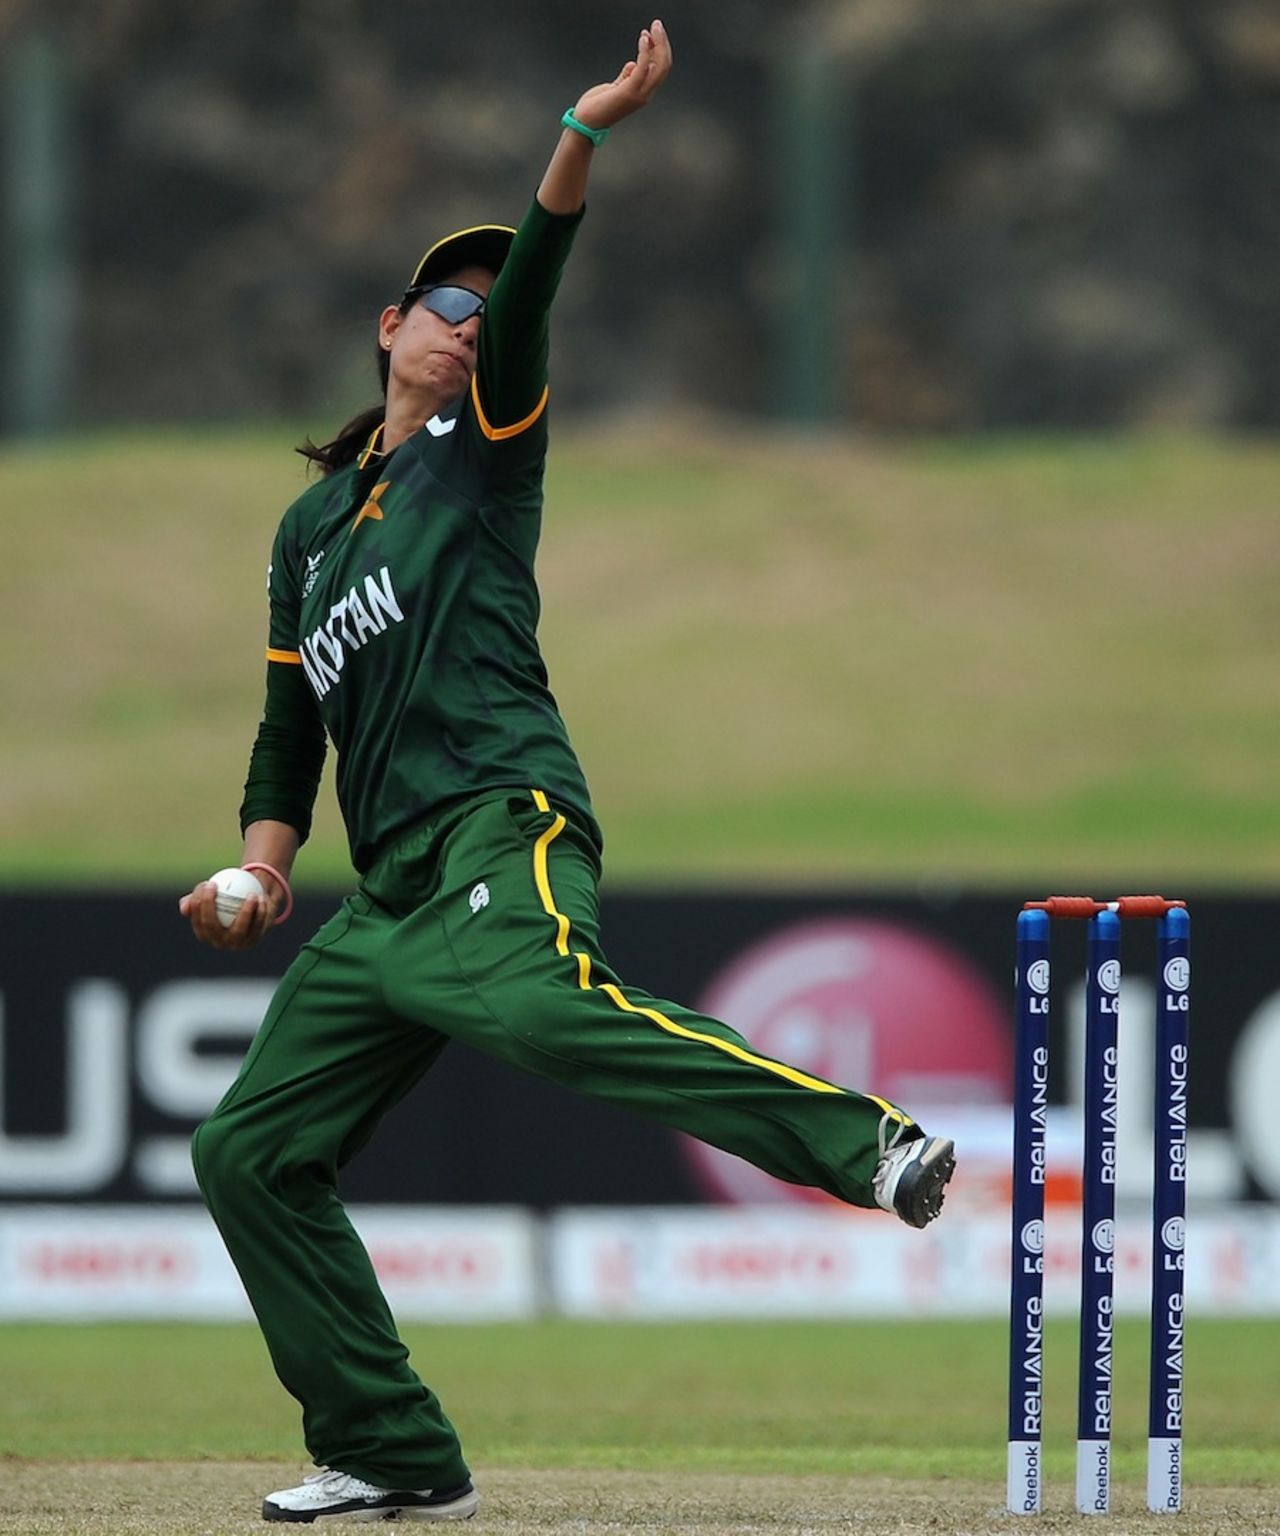 Pakistan captain Sana Mir picked up two wickets, England v Pakistan, Women's World T20 2012, Group A, Galle, September 27, 2012